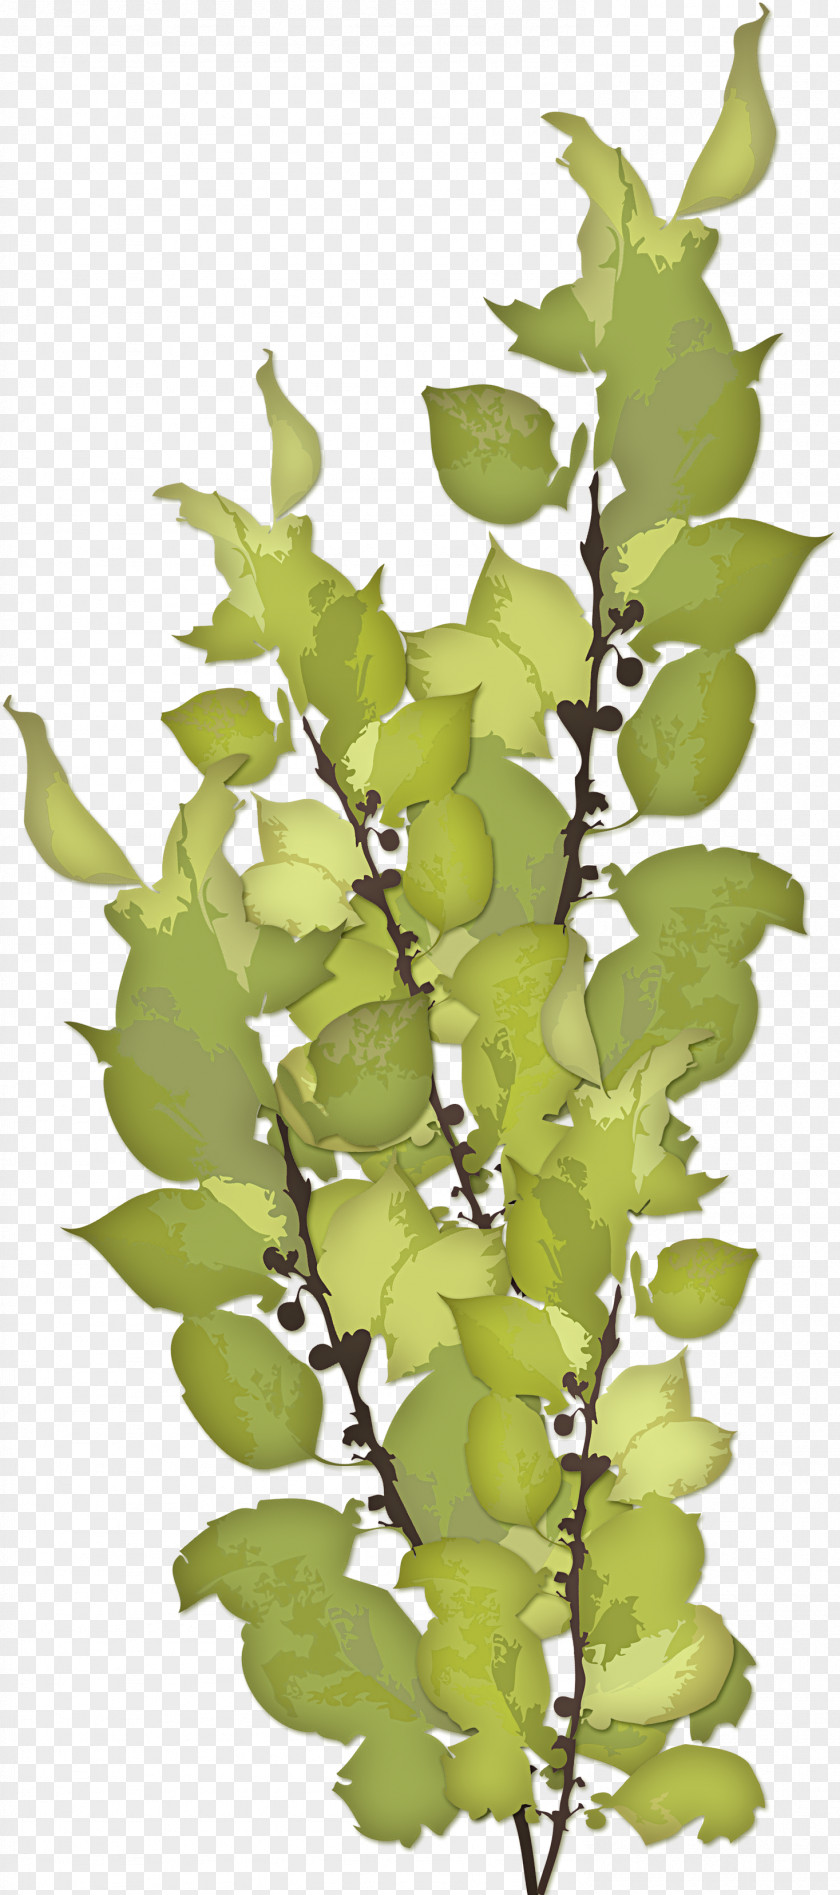 Green Leaves Excretion Feast Of Our Lady Sorrows Excretory System Ureter Anatomy PNG